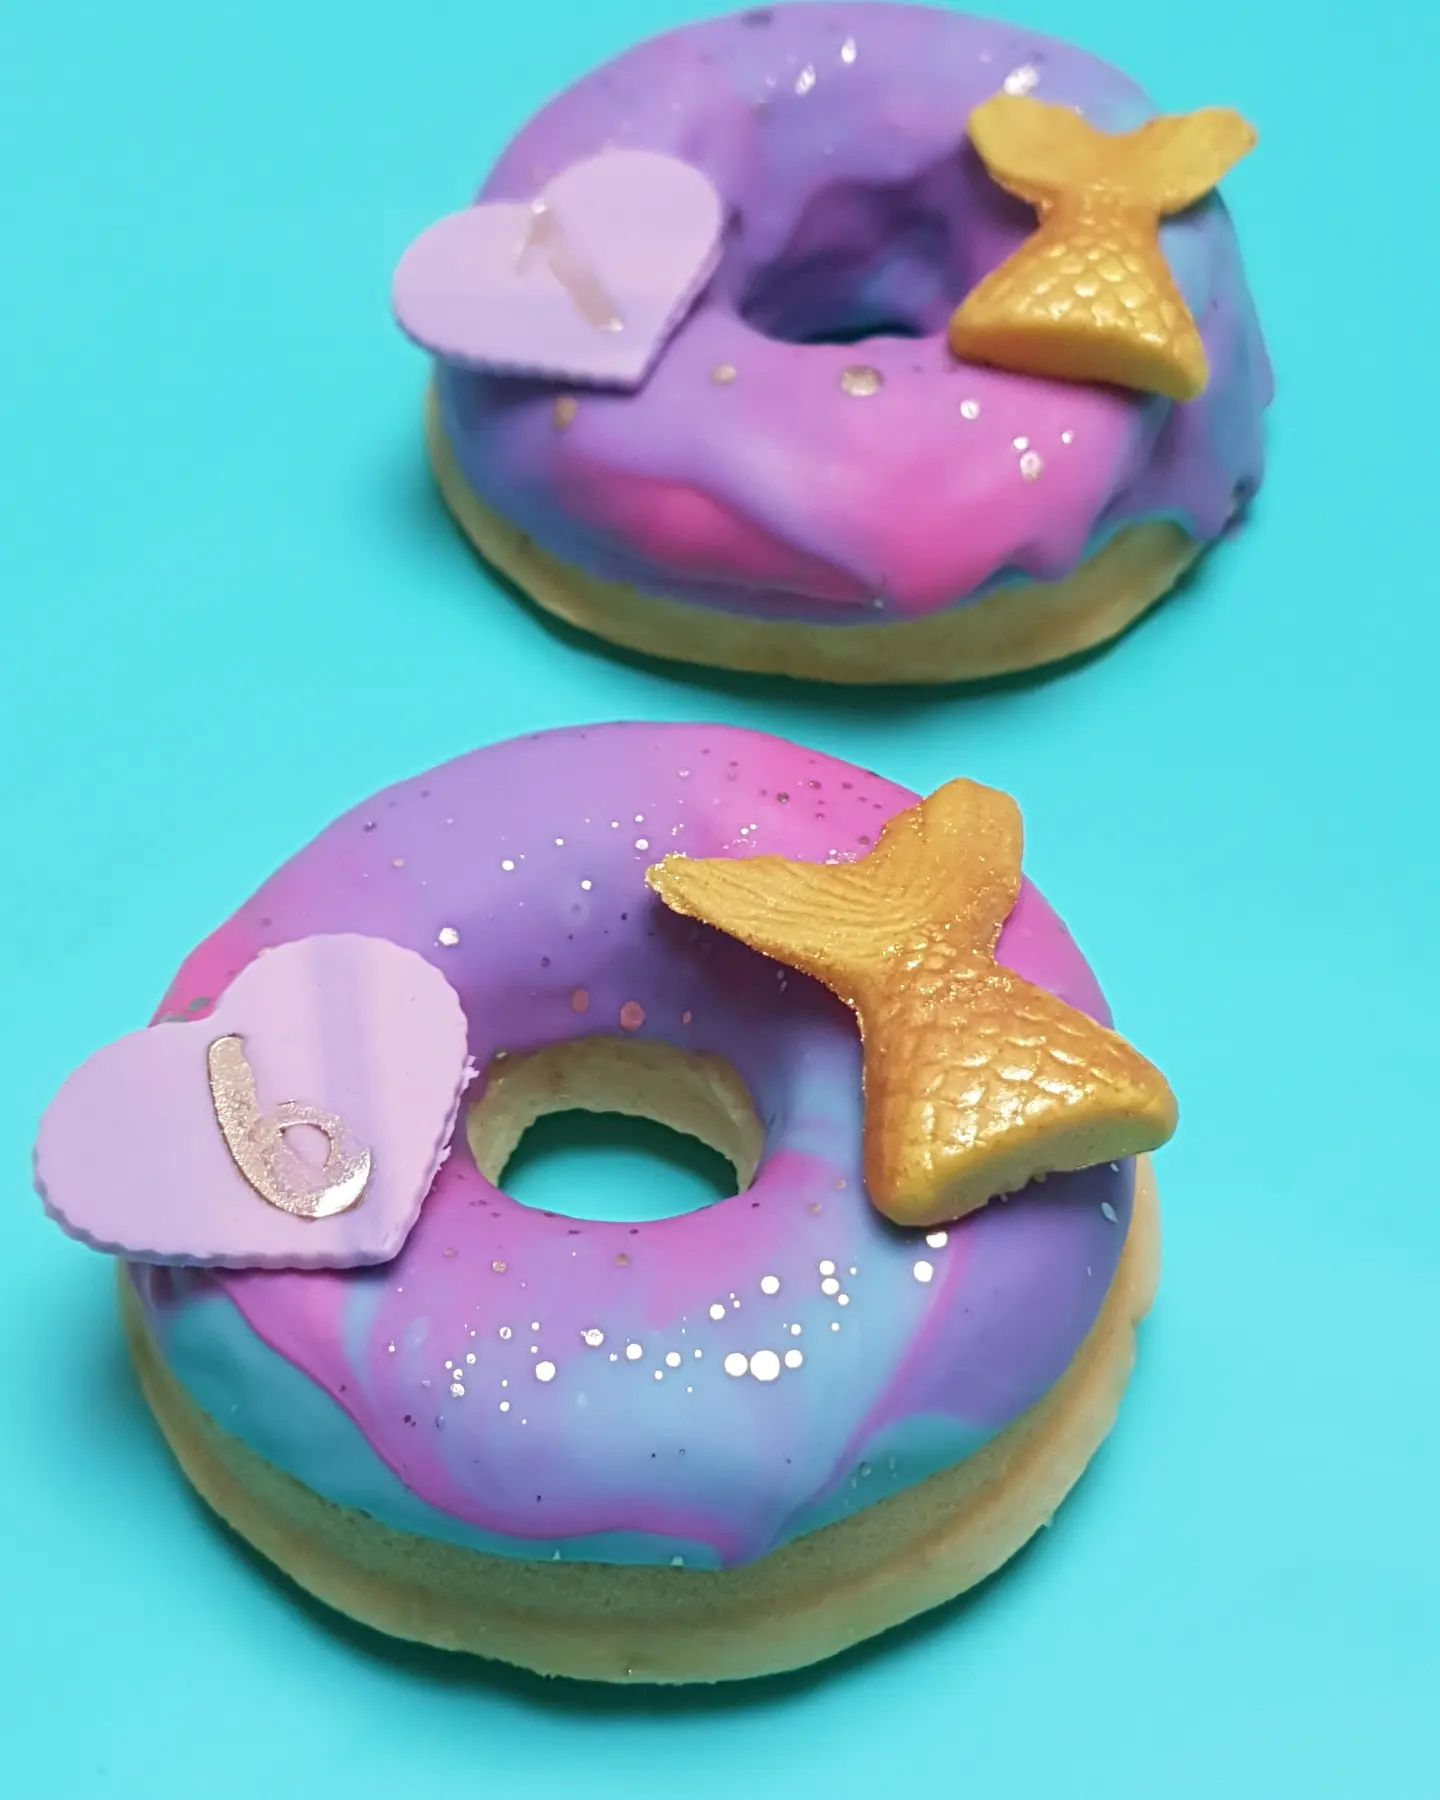 Mermaid donuts . Colours @colour.mill Tiffany, hot pink, purple. #juffrouwtaart #marble #zeemeermin #mermaid #zeemeermindonut #cake #donut #donuts #chocolatedonuts #cakedonuts #treatboxes #cakesicles #pastelcake #juffrouwtaart  #cupcake #cakes #pink #instacake #cakesdaily #caketrends #cakedecorator #cakestagram #sprinkles #taartgroningen#cakecakecake #juffrouwtaartsweets